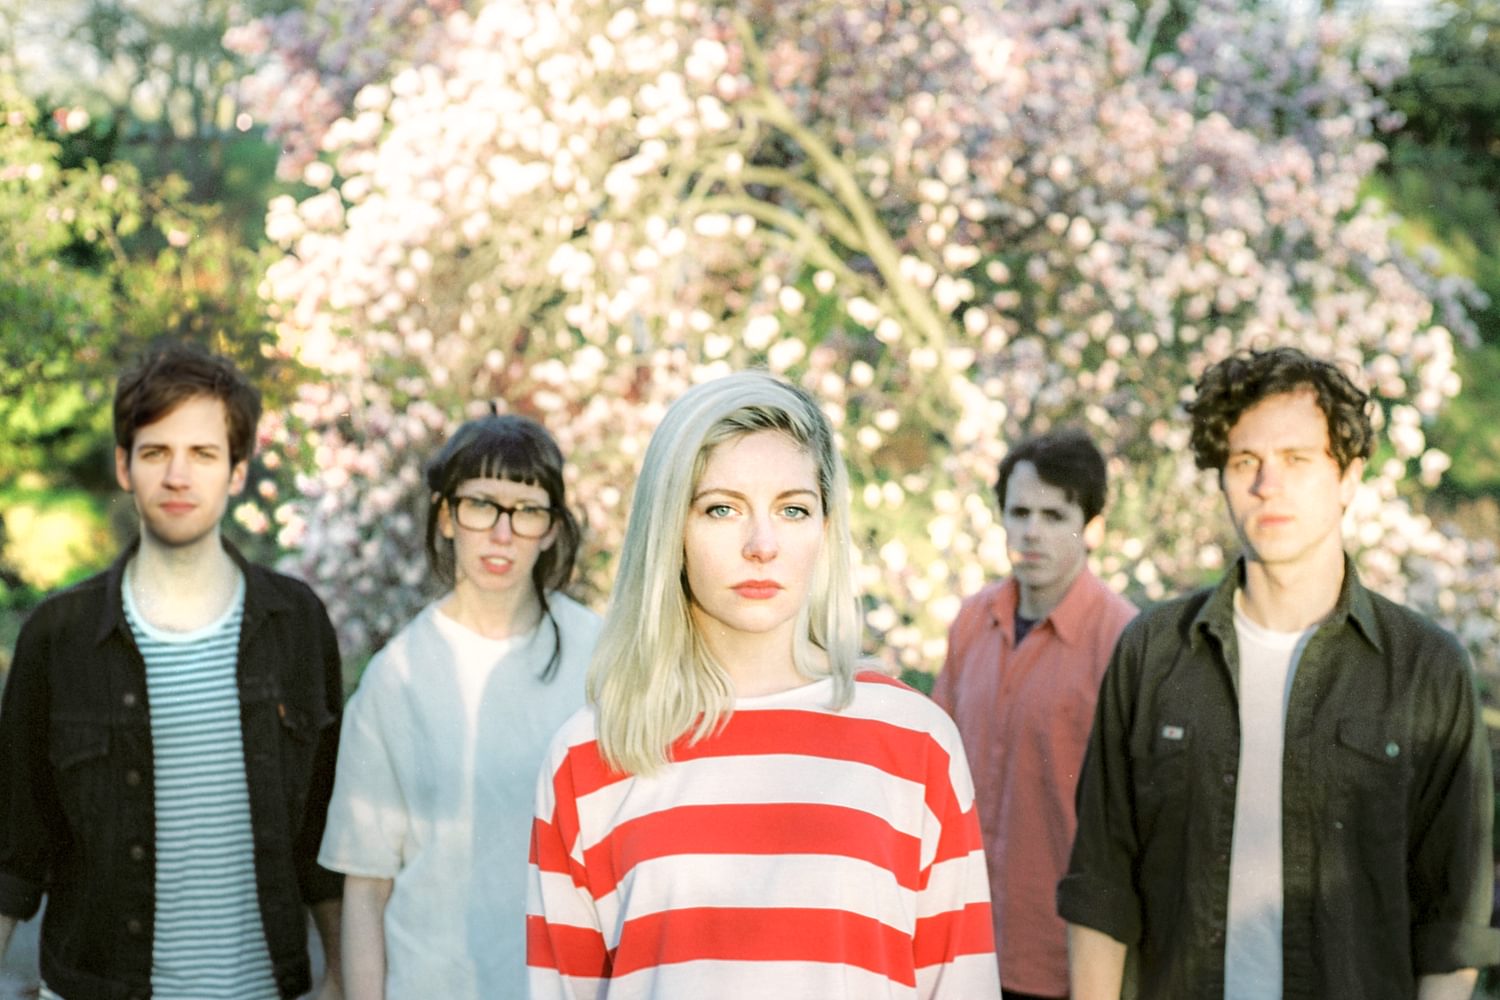 Alvvays, SOPHIE, Alice Boman confirmed to play London’s VISIONS Festival 2014